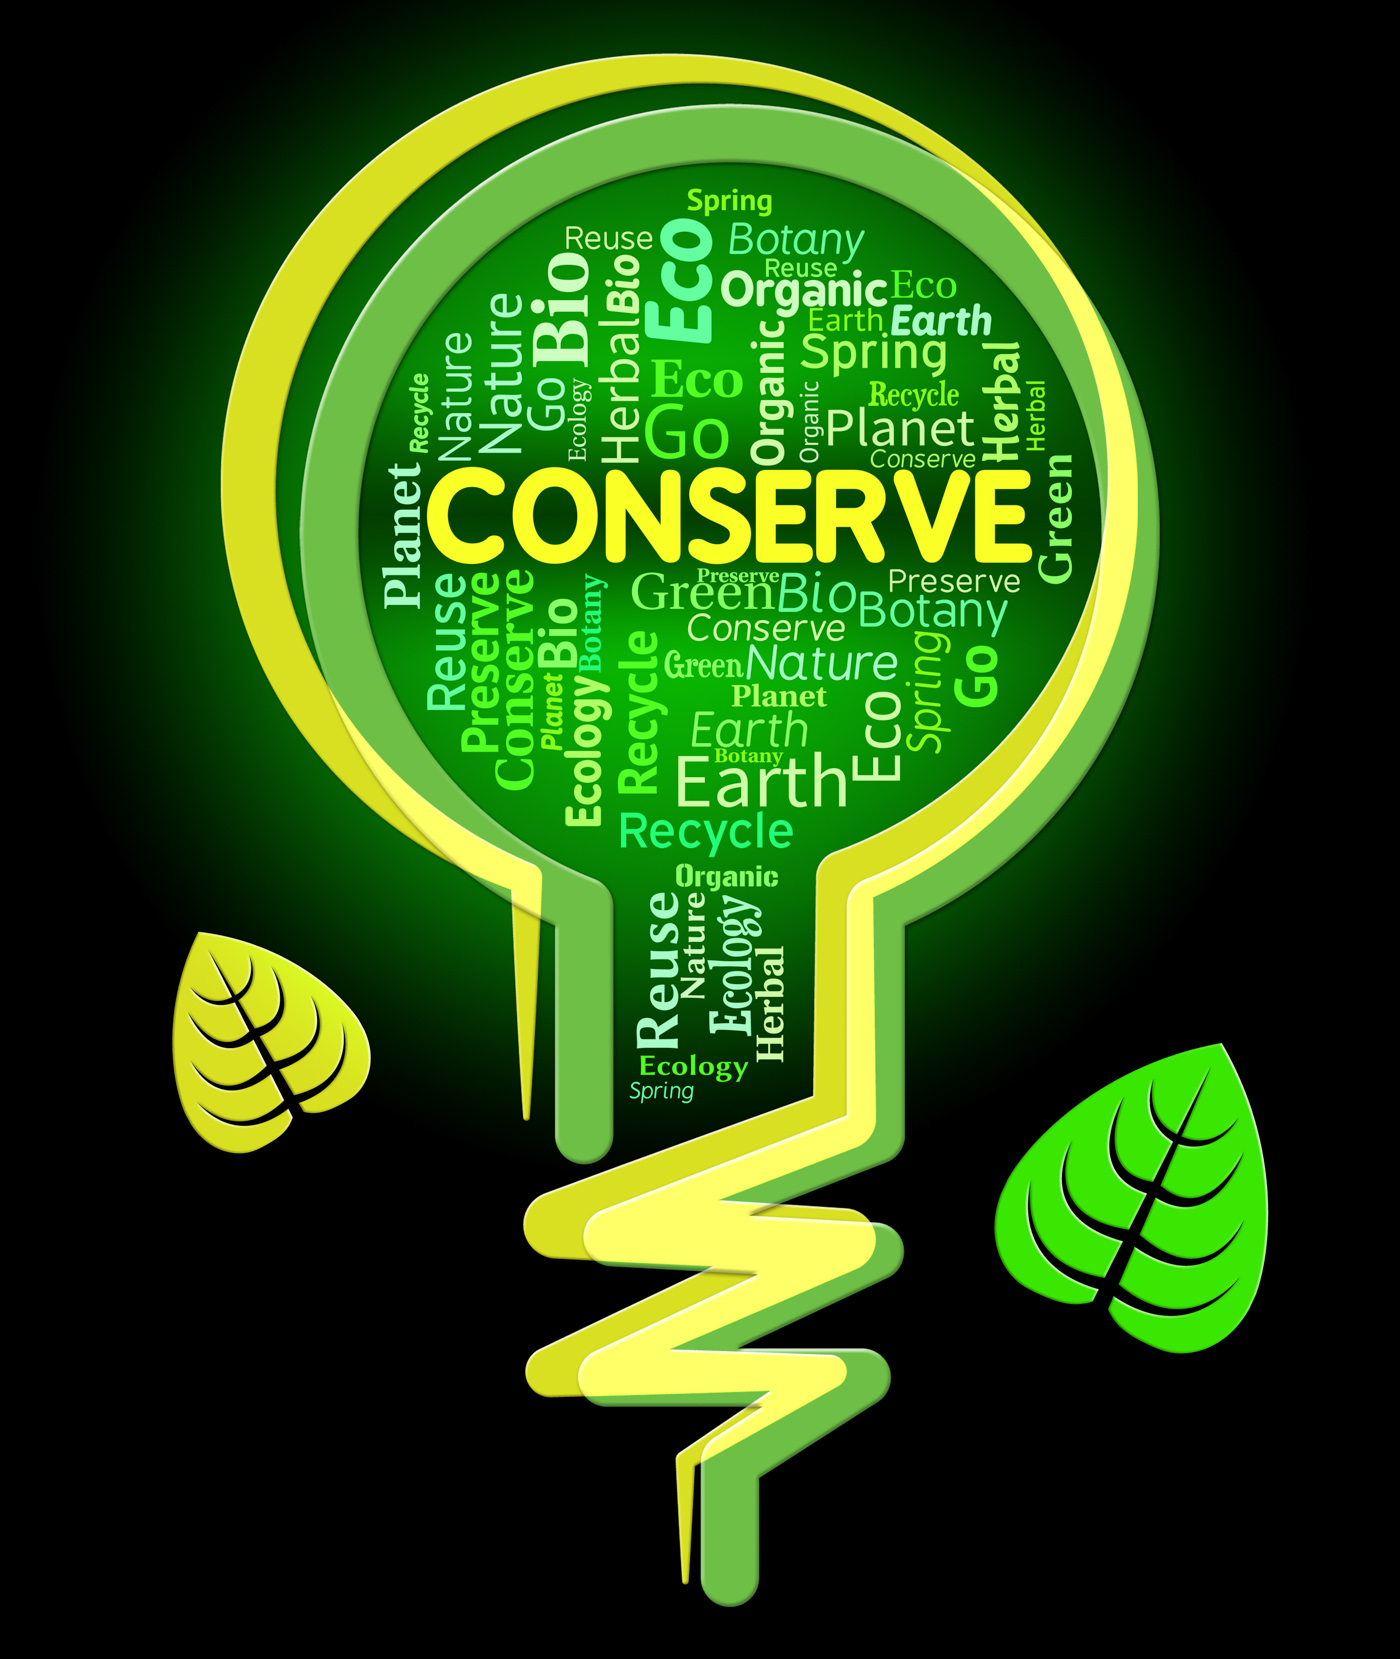 Conserve lightbulb shows sustainable conserving and protecting photo